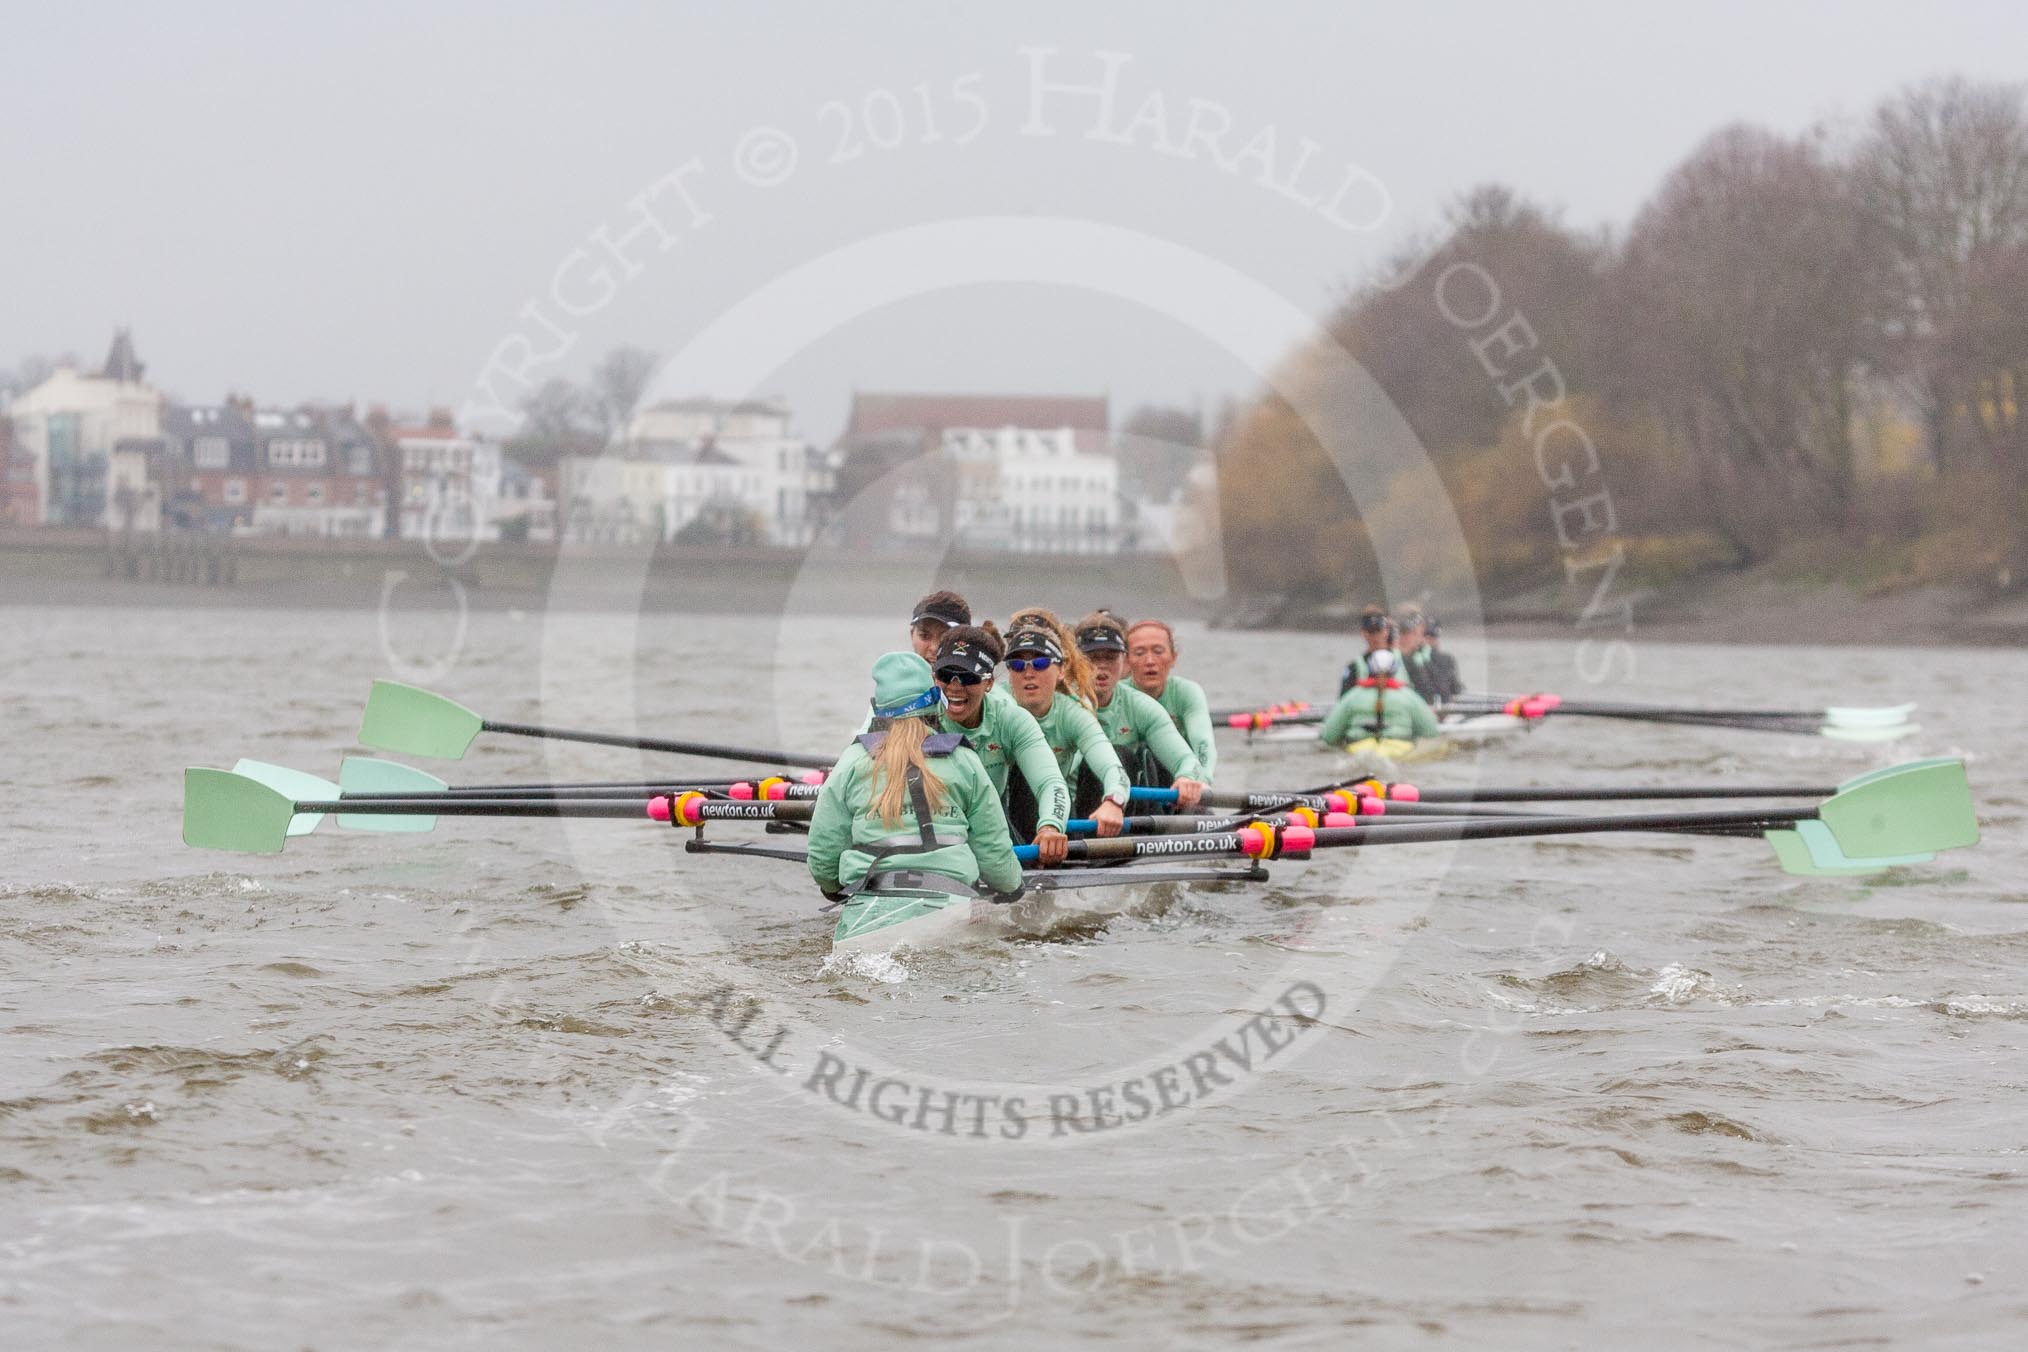 The Boat Race season 2016 - Women's Boat Race Trial Eights (CUWBC, Cambridge): "Tideway" chasing "Twickenham" in the Bandstand area.
River Thames between Putney Bridge and Mortlake,
London SW15,

United Kingdom,
on 10 December 2015 at 11:17, image #108